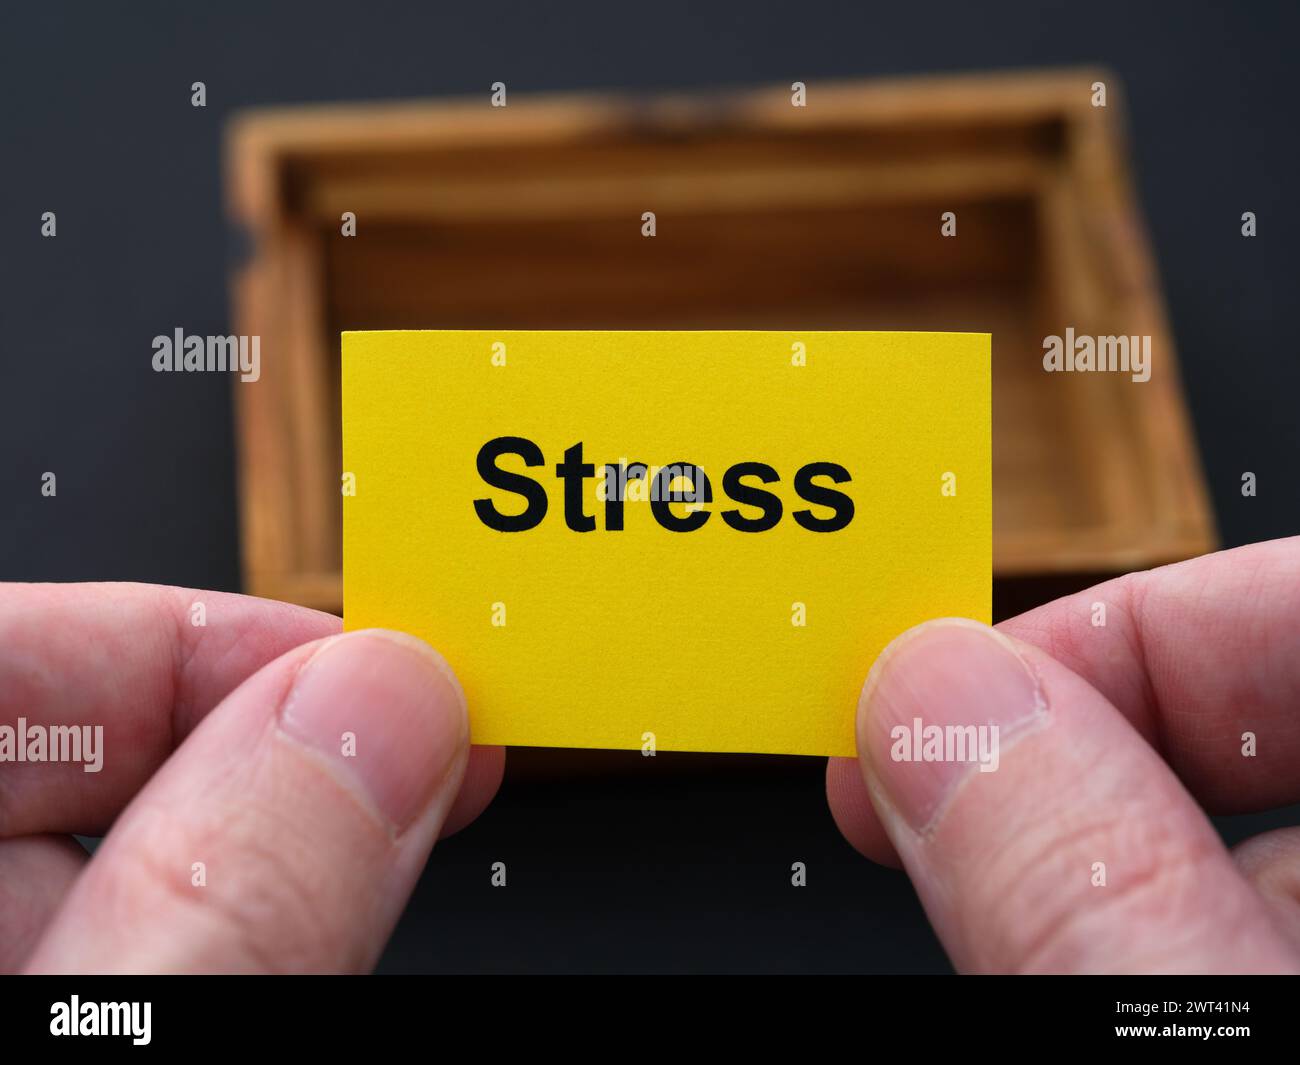 A man holding a piece of yellow paper with the word Stress on it in his hands over a small empty wooden box. Close up. Stock Photo